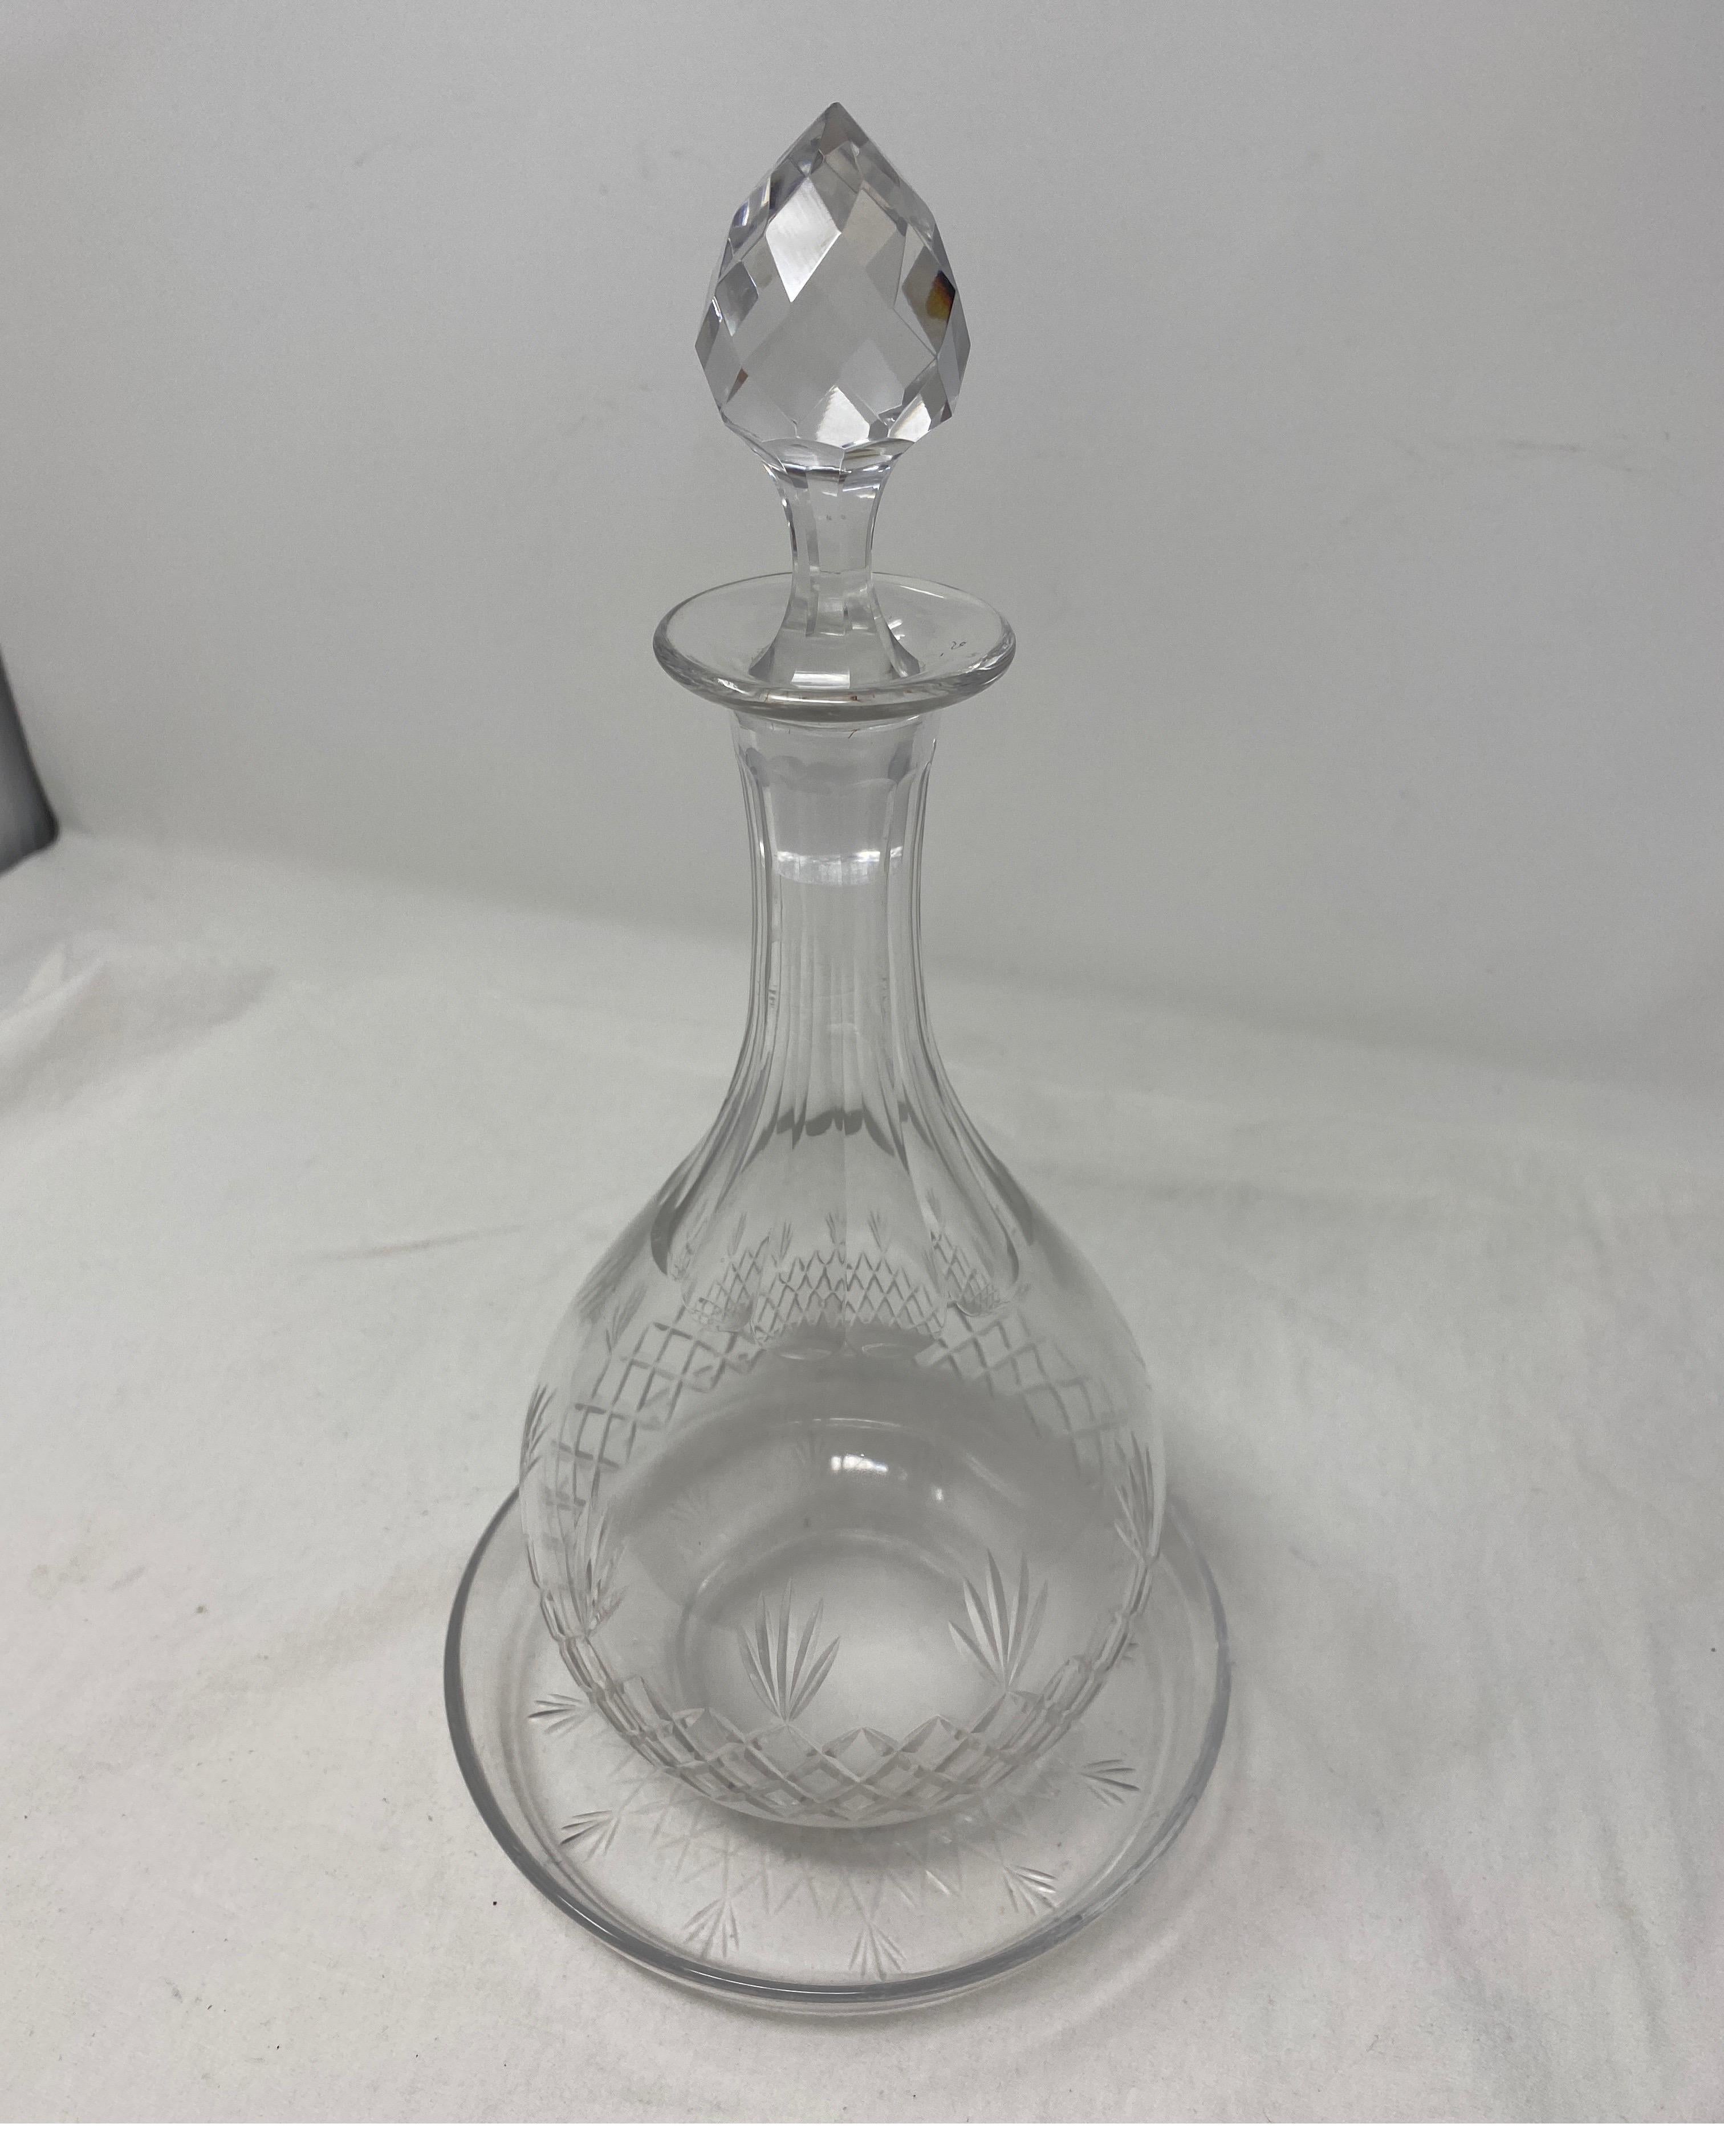 Baccarat carafe with coaster. 19th century. 3 pieces. The width of the carafe is approx. 4 1/2